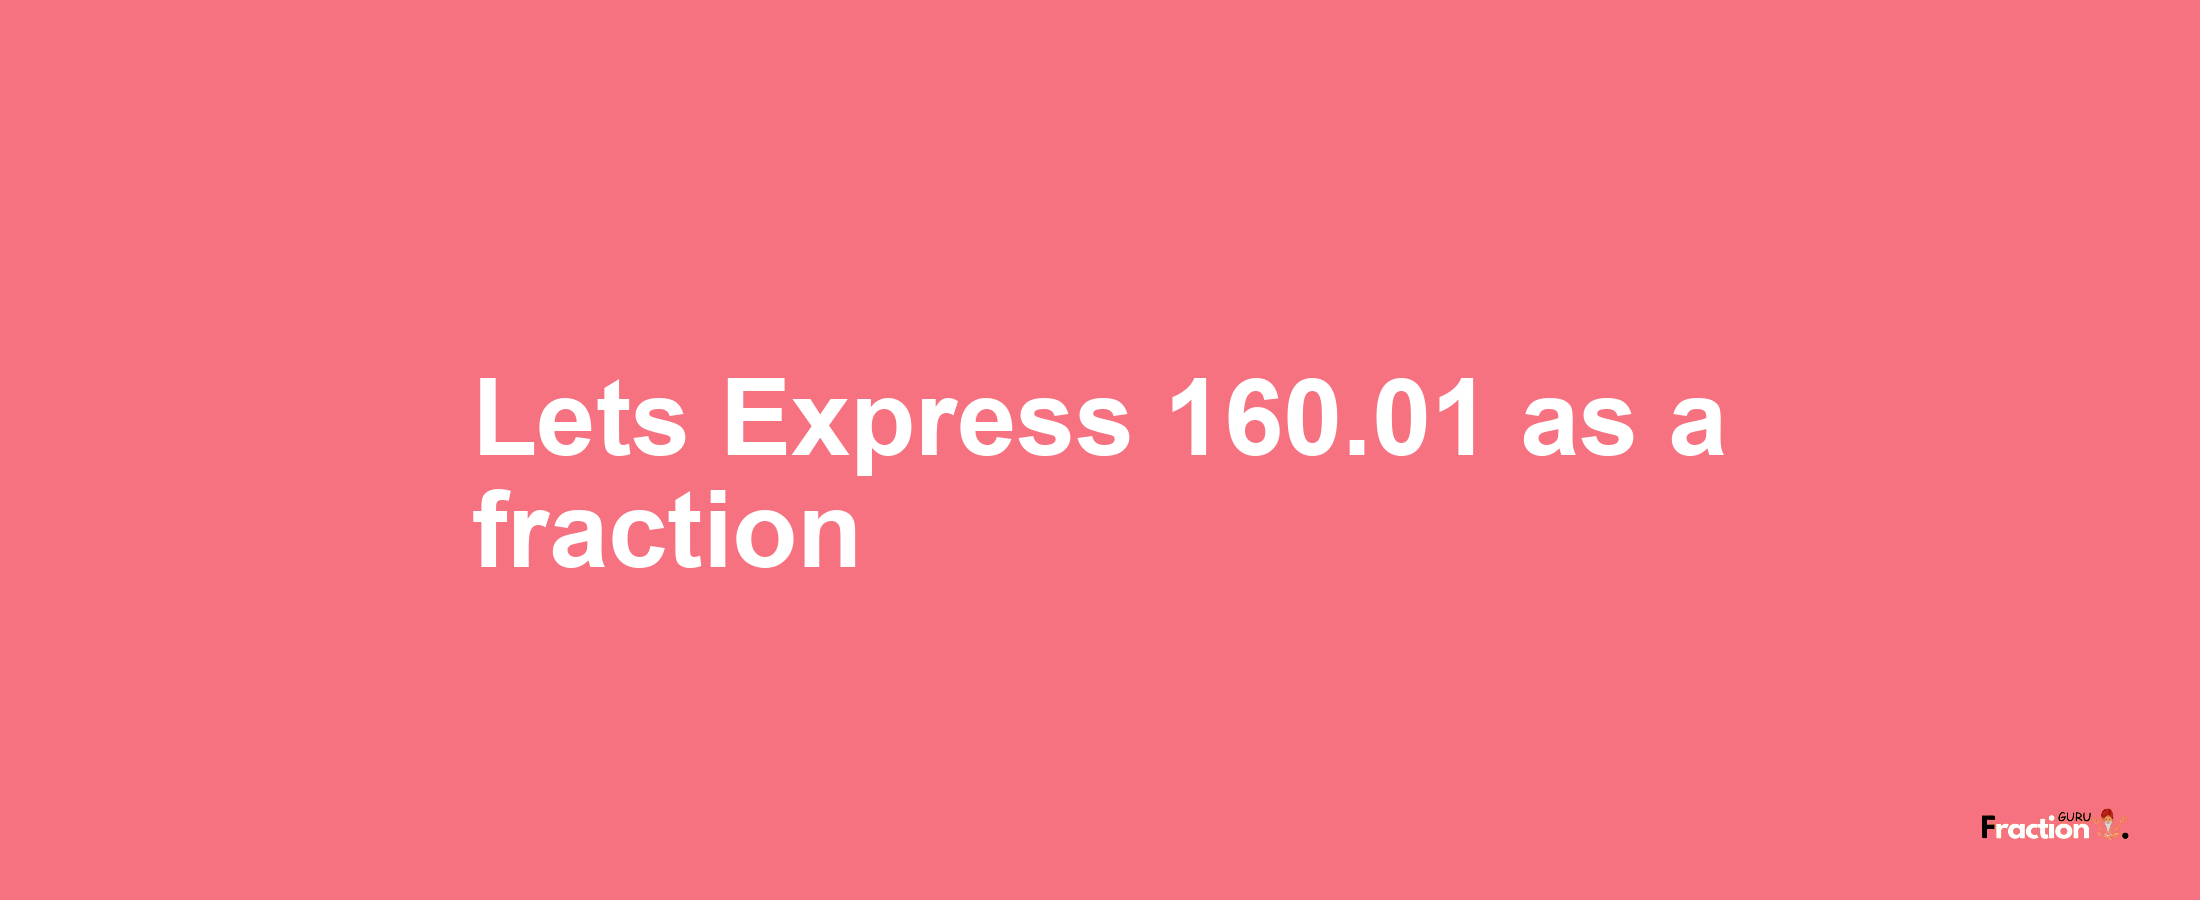 Lets Express 160.01 as afraction